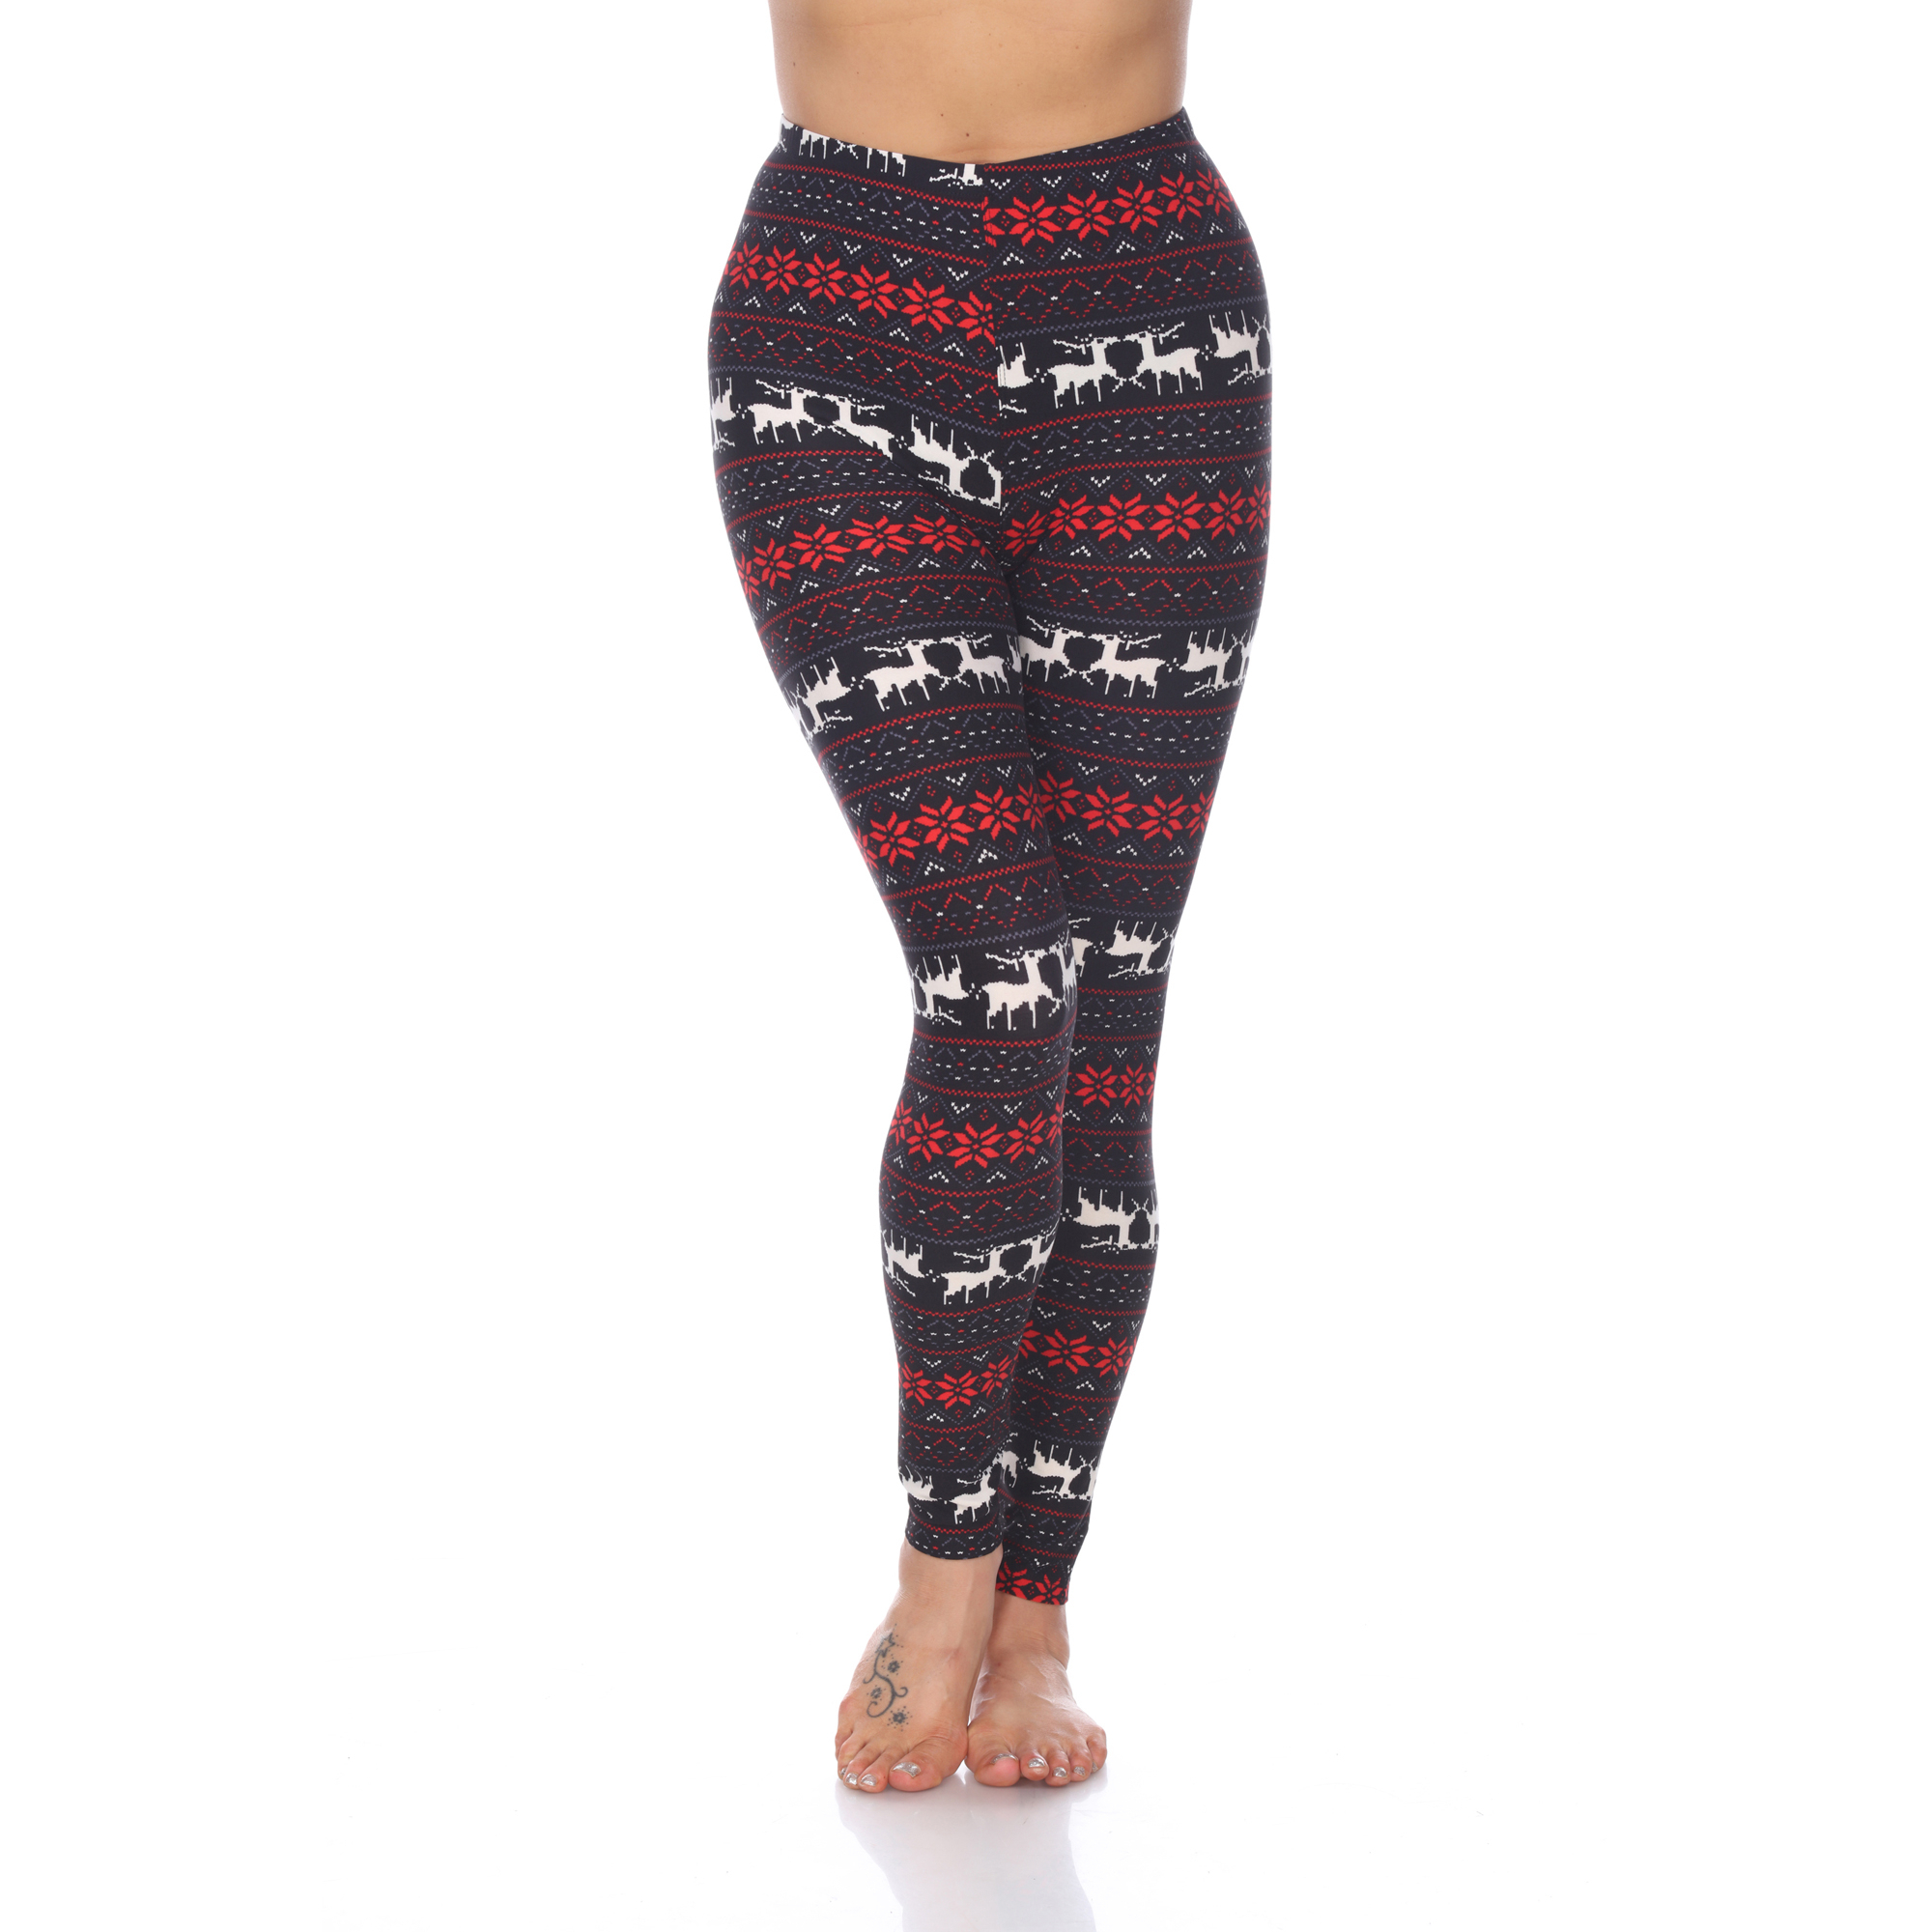 White Mark's Holiday Stretch Leggings - Black/Red, One Size